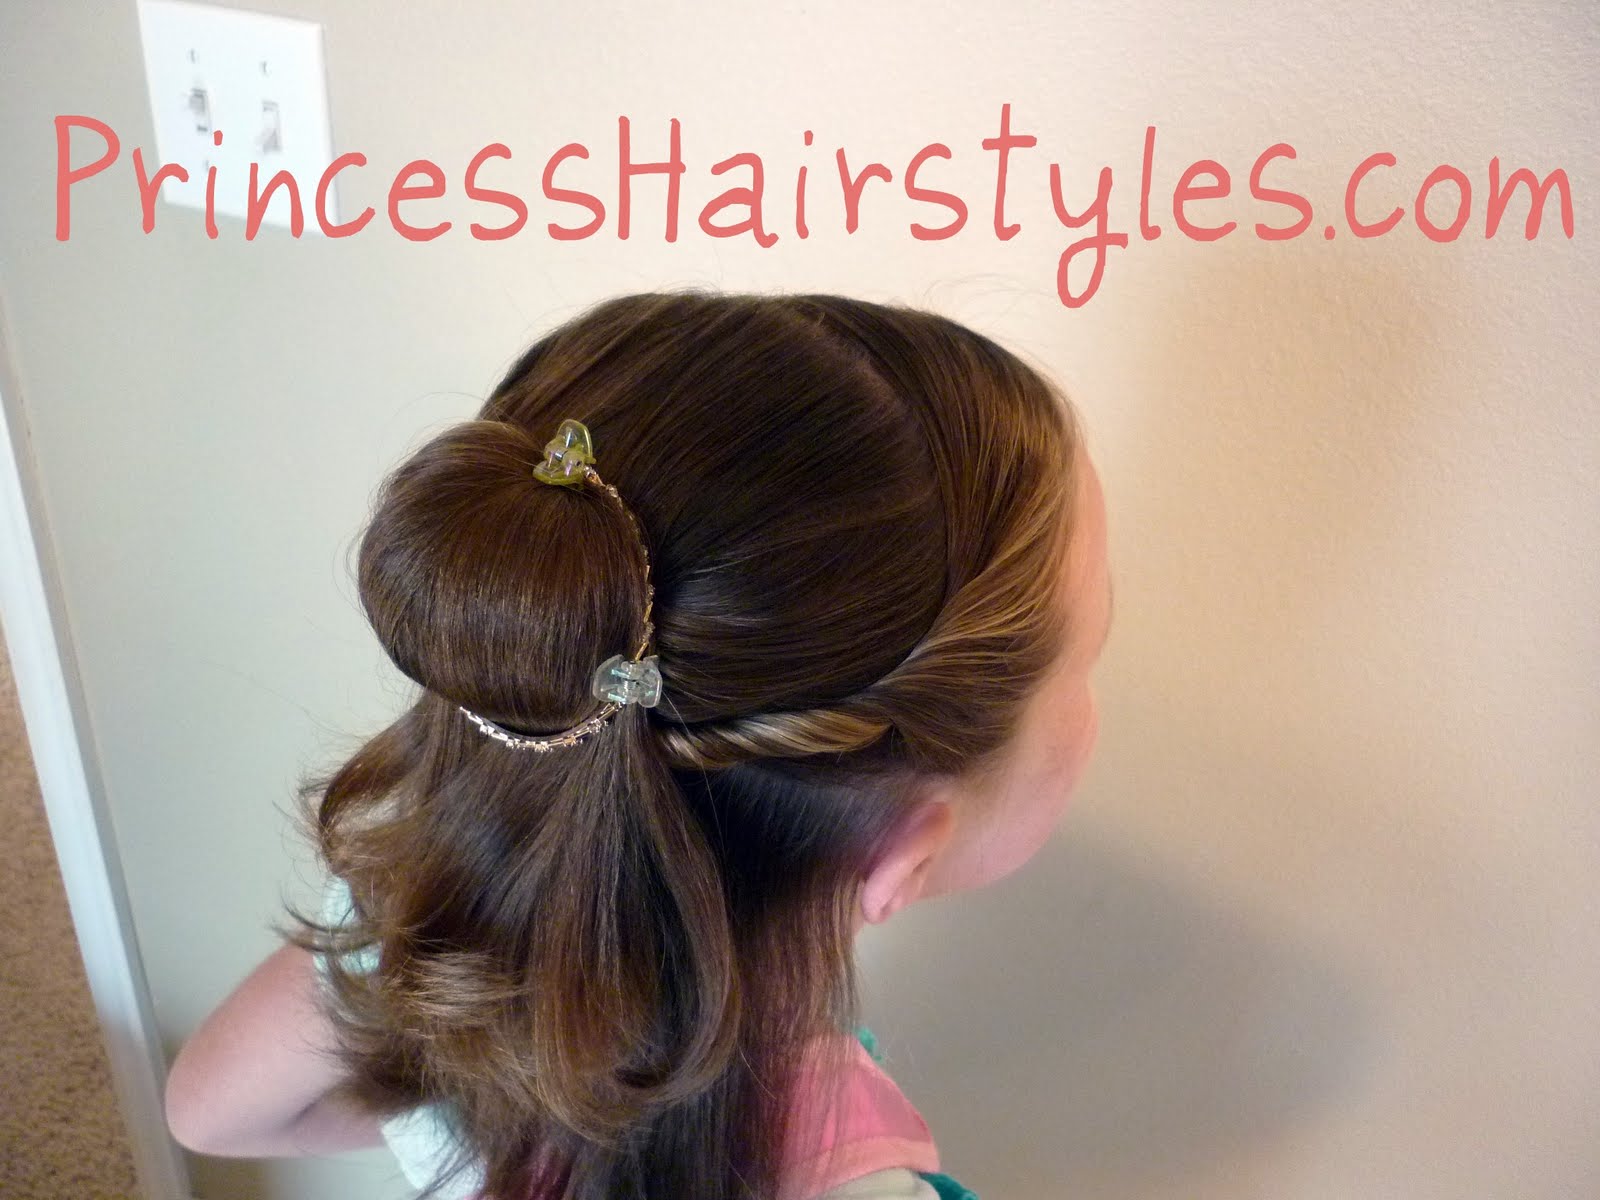 Belle Hairstyle For Short Hair Hairstyles For Girls Princess